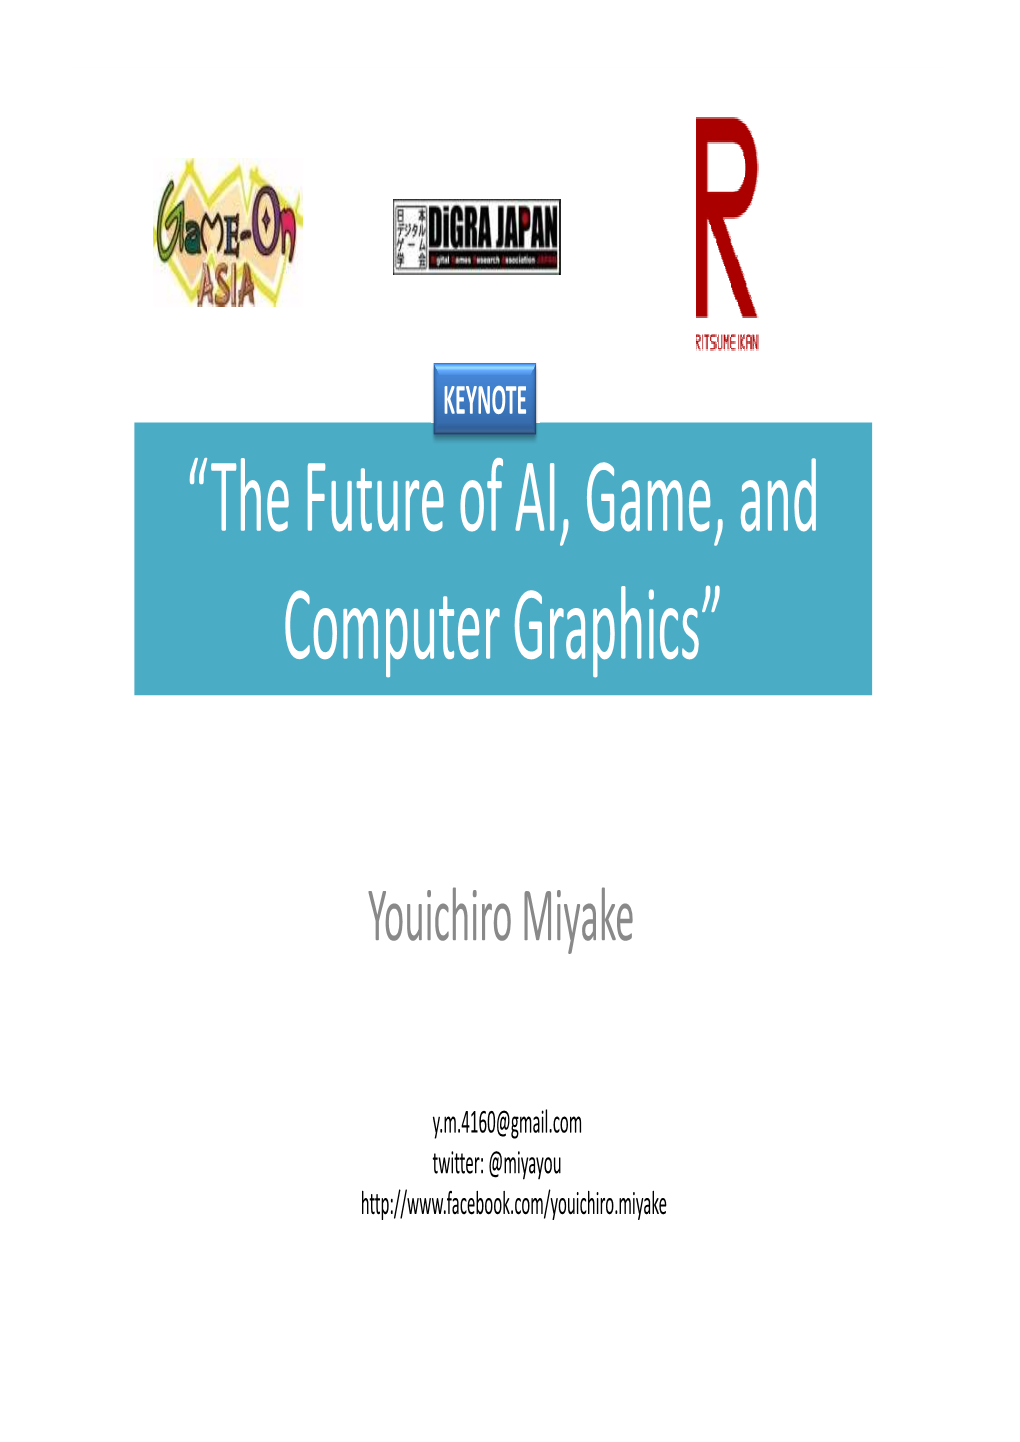 “The Future of AI, Game, and Computer Graphics”